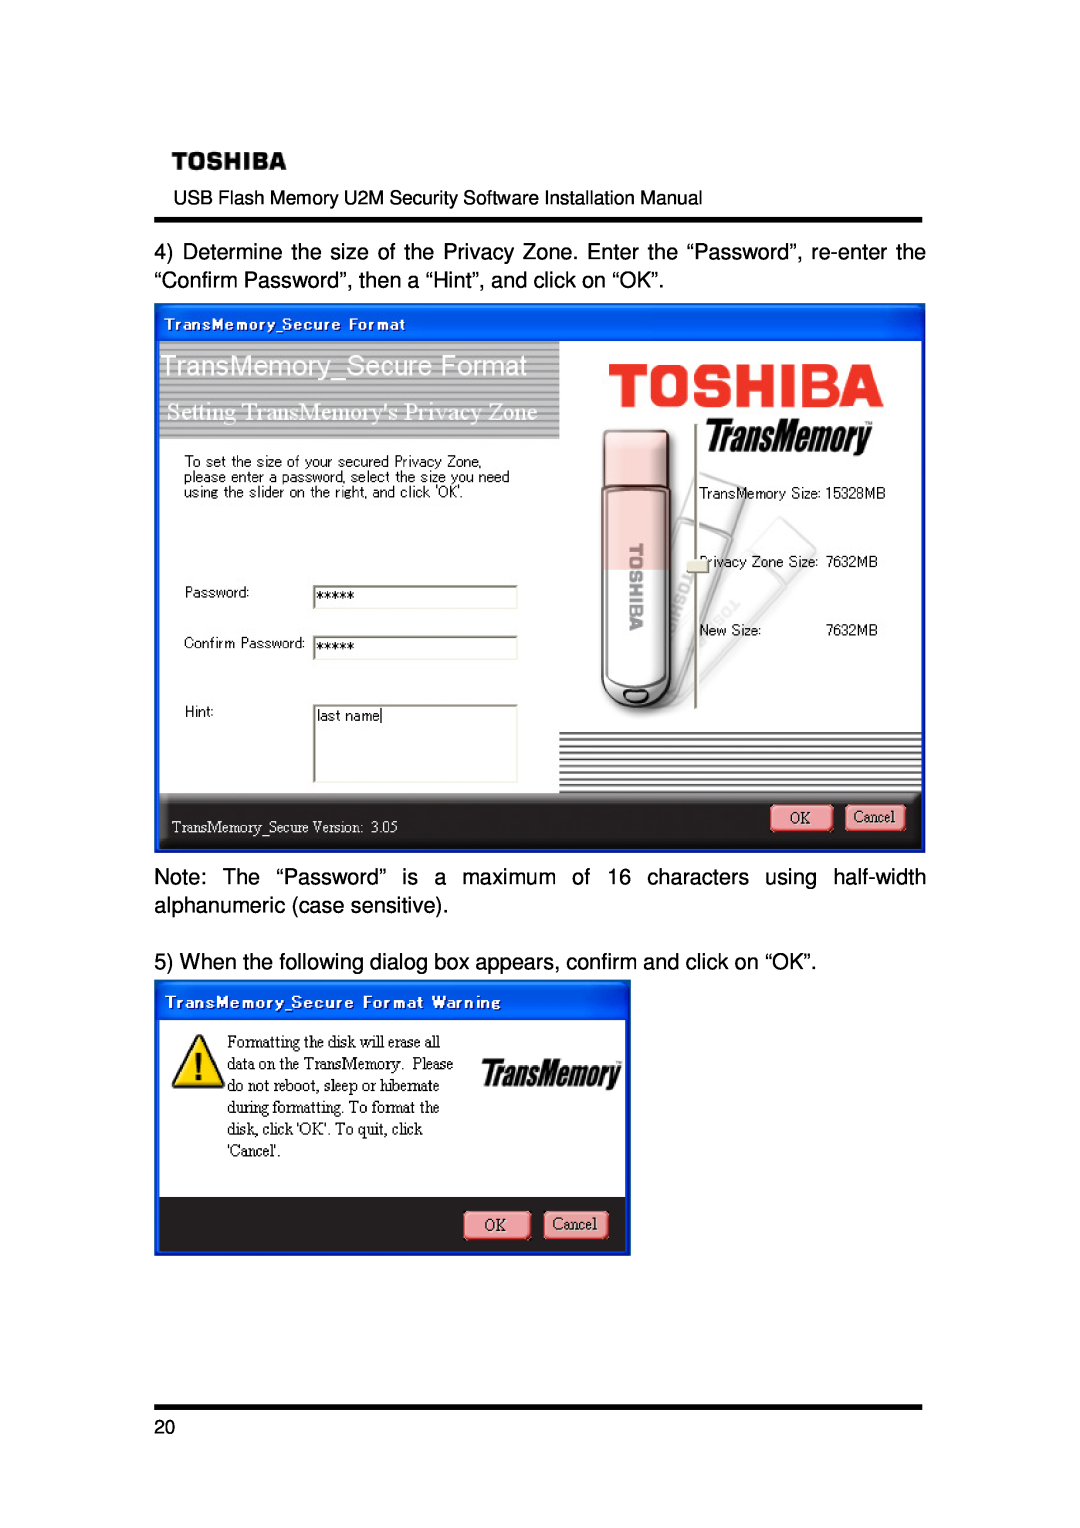 Toshiba U2M-008GT, U2M-016GT, U2M-004GT installation manual When the following dialog box appears, confirm and click on “OK” 